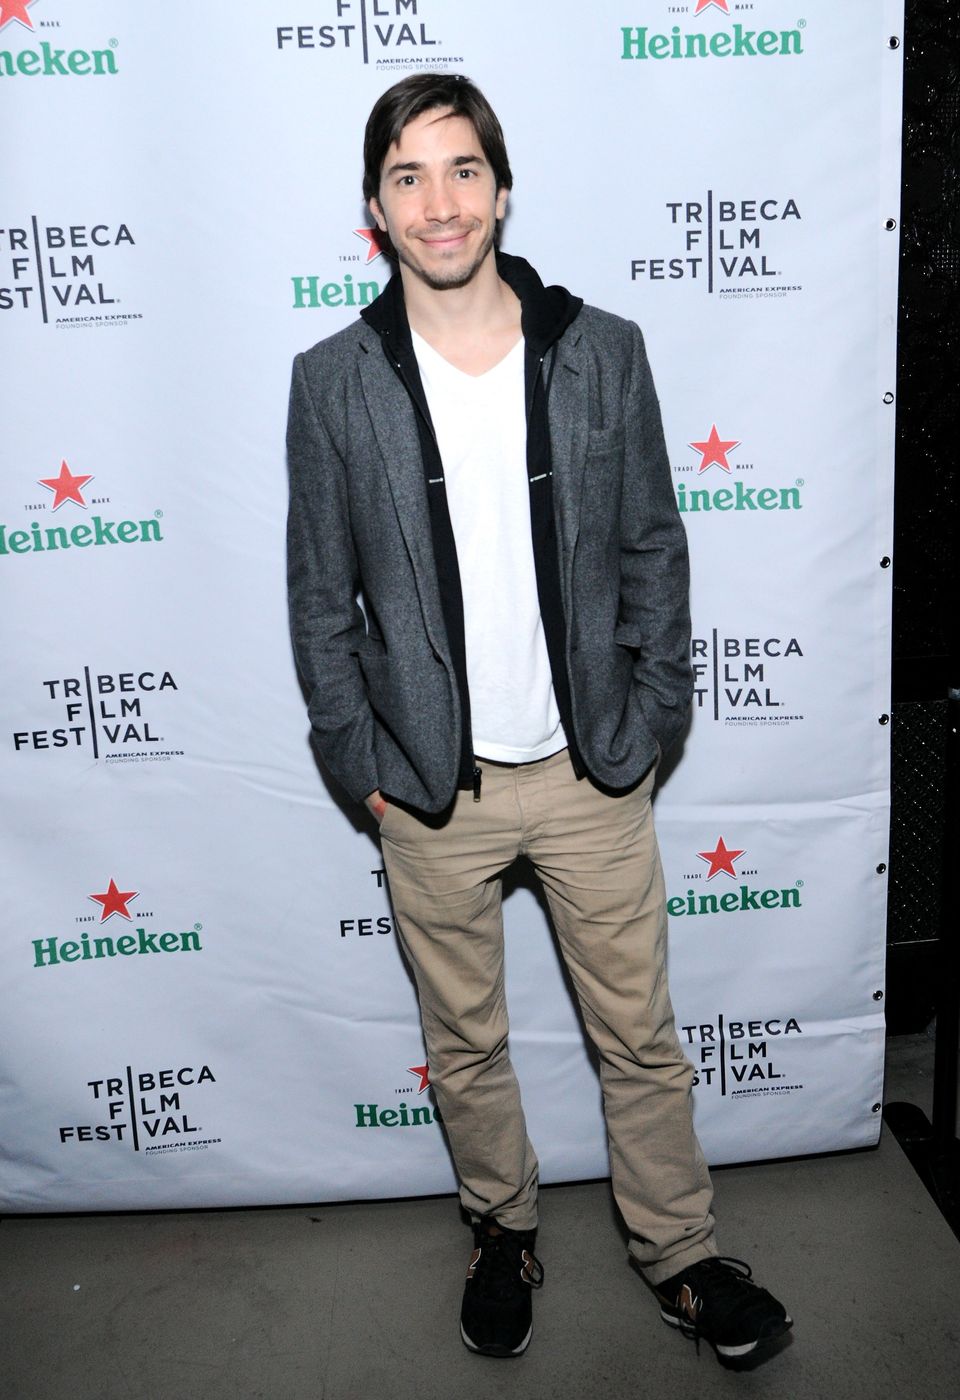 Heineken Hosts After Party For "Single Shot" With Featured Guests Justin Long And Sam Rockwell